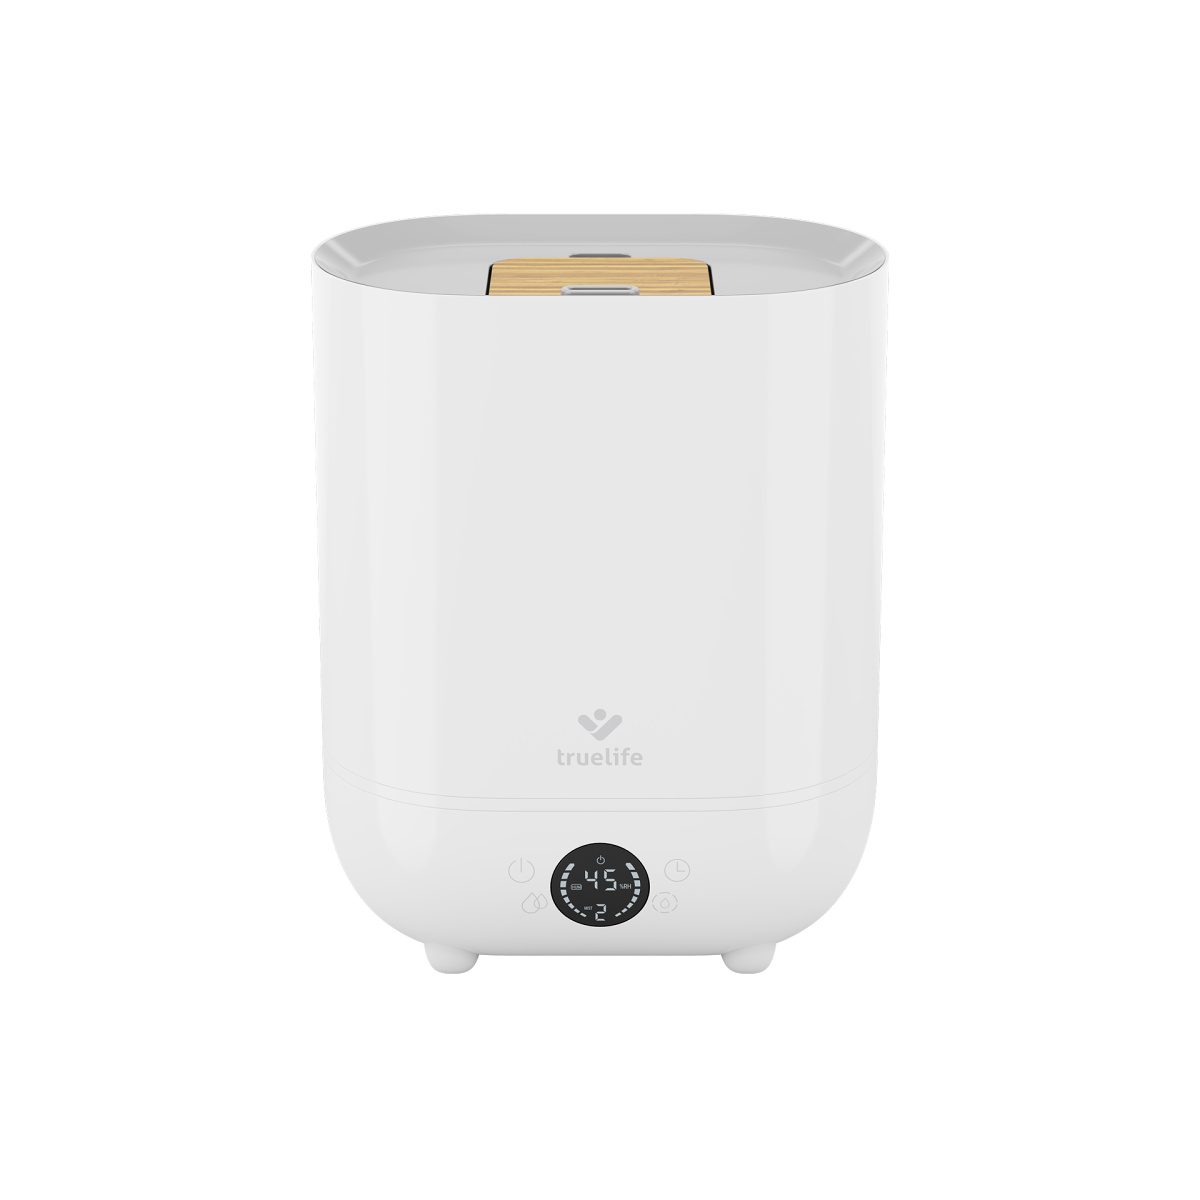 TrueLife AIR Humidifier H5 Touch – 3 in 1 Humidifier